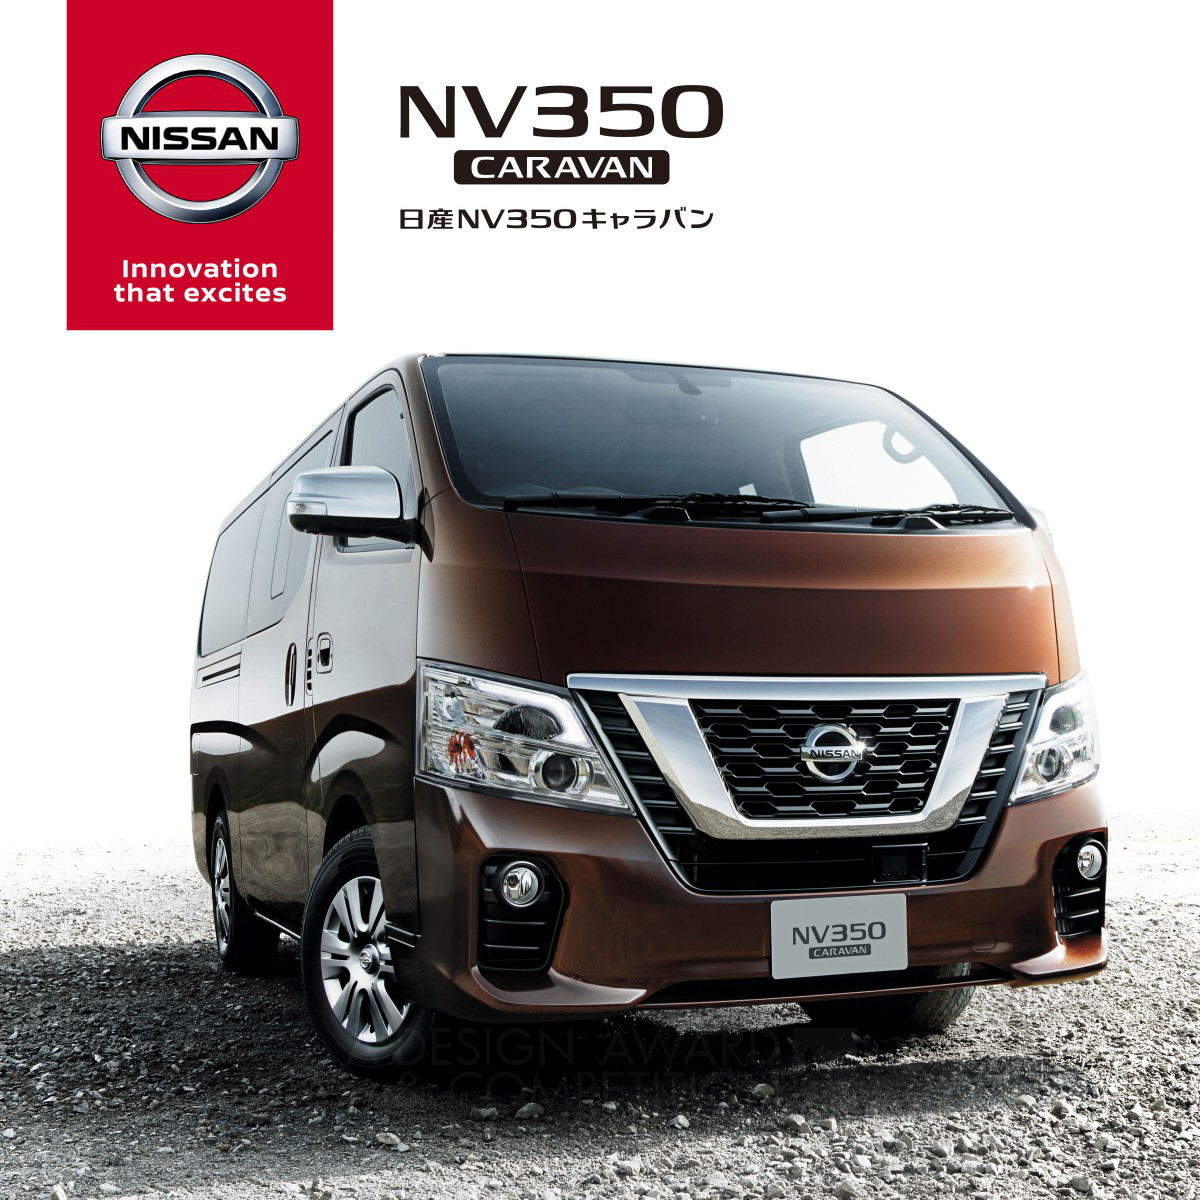 NISSAN NV350 Brochure by E-graphics communications